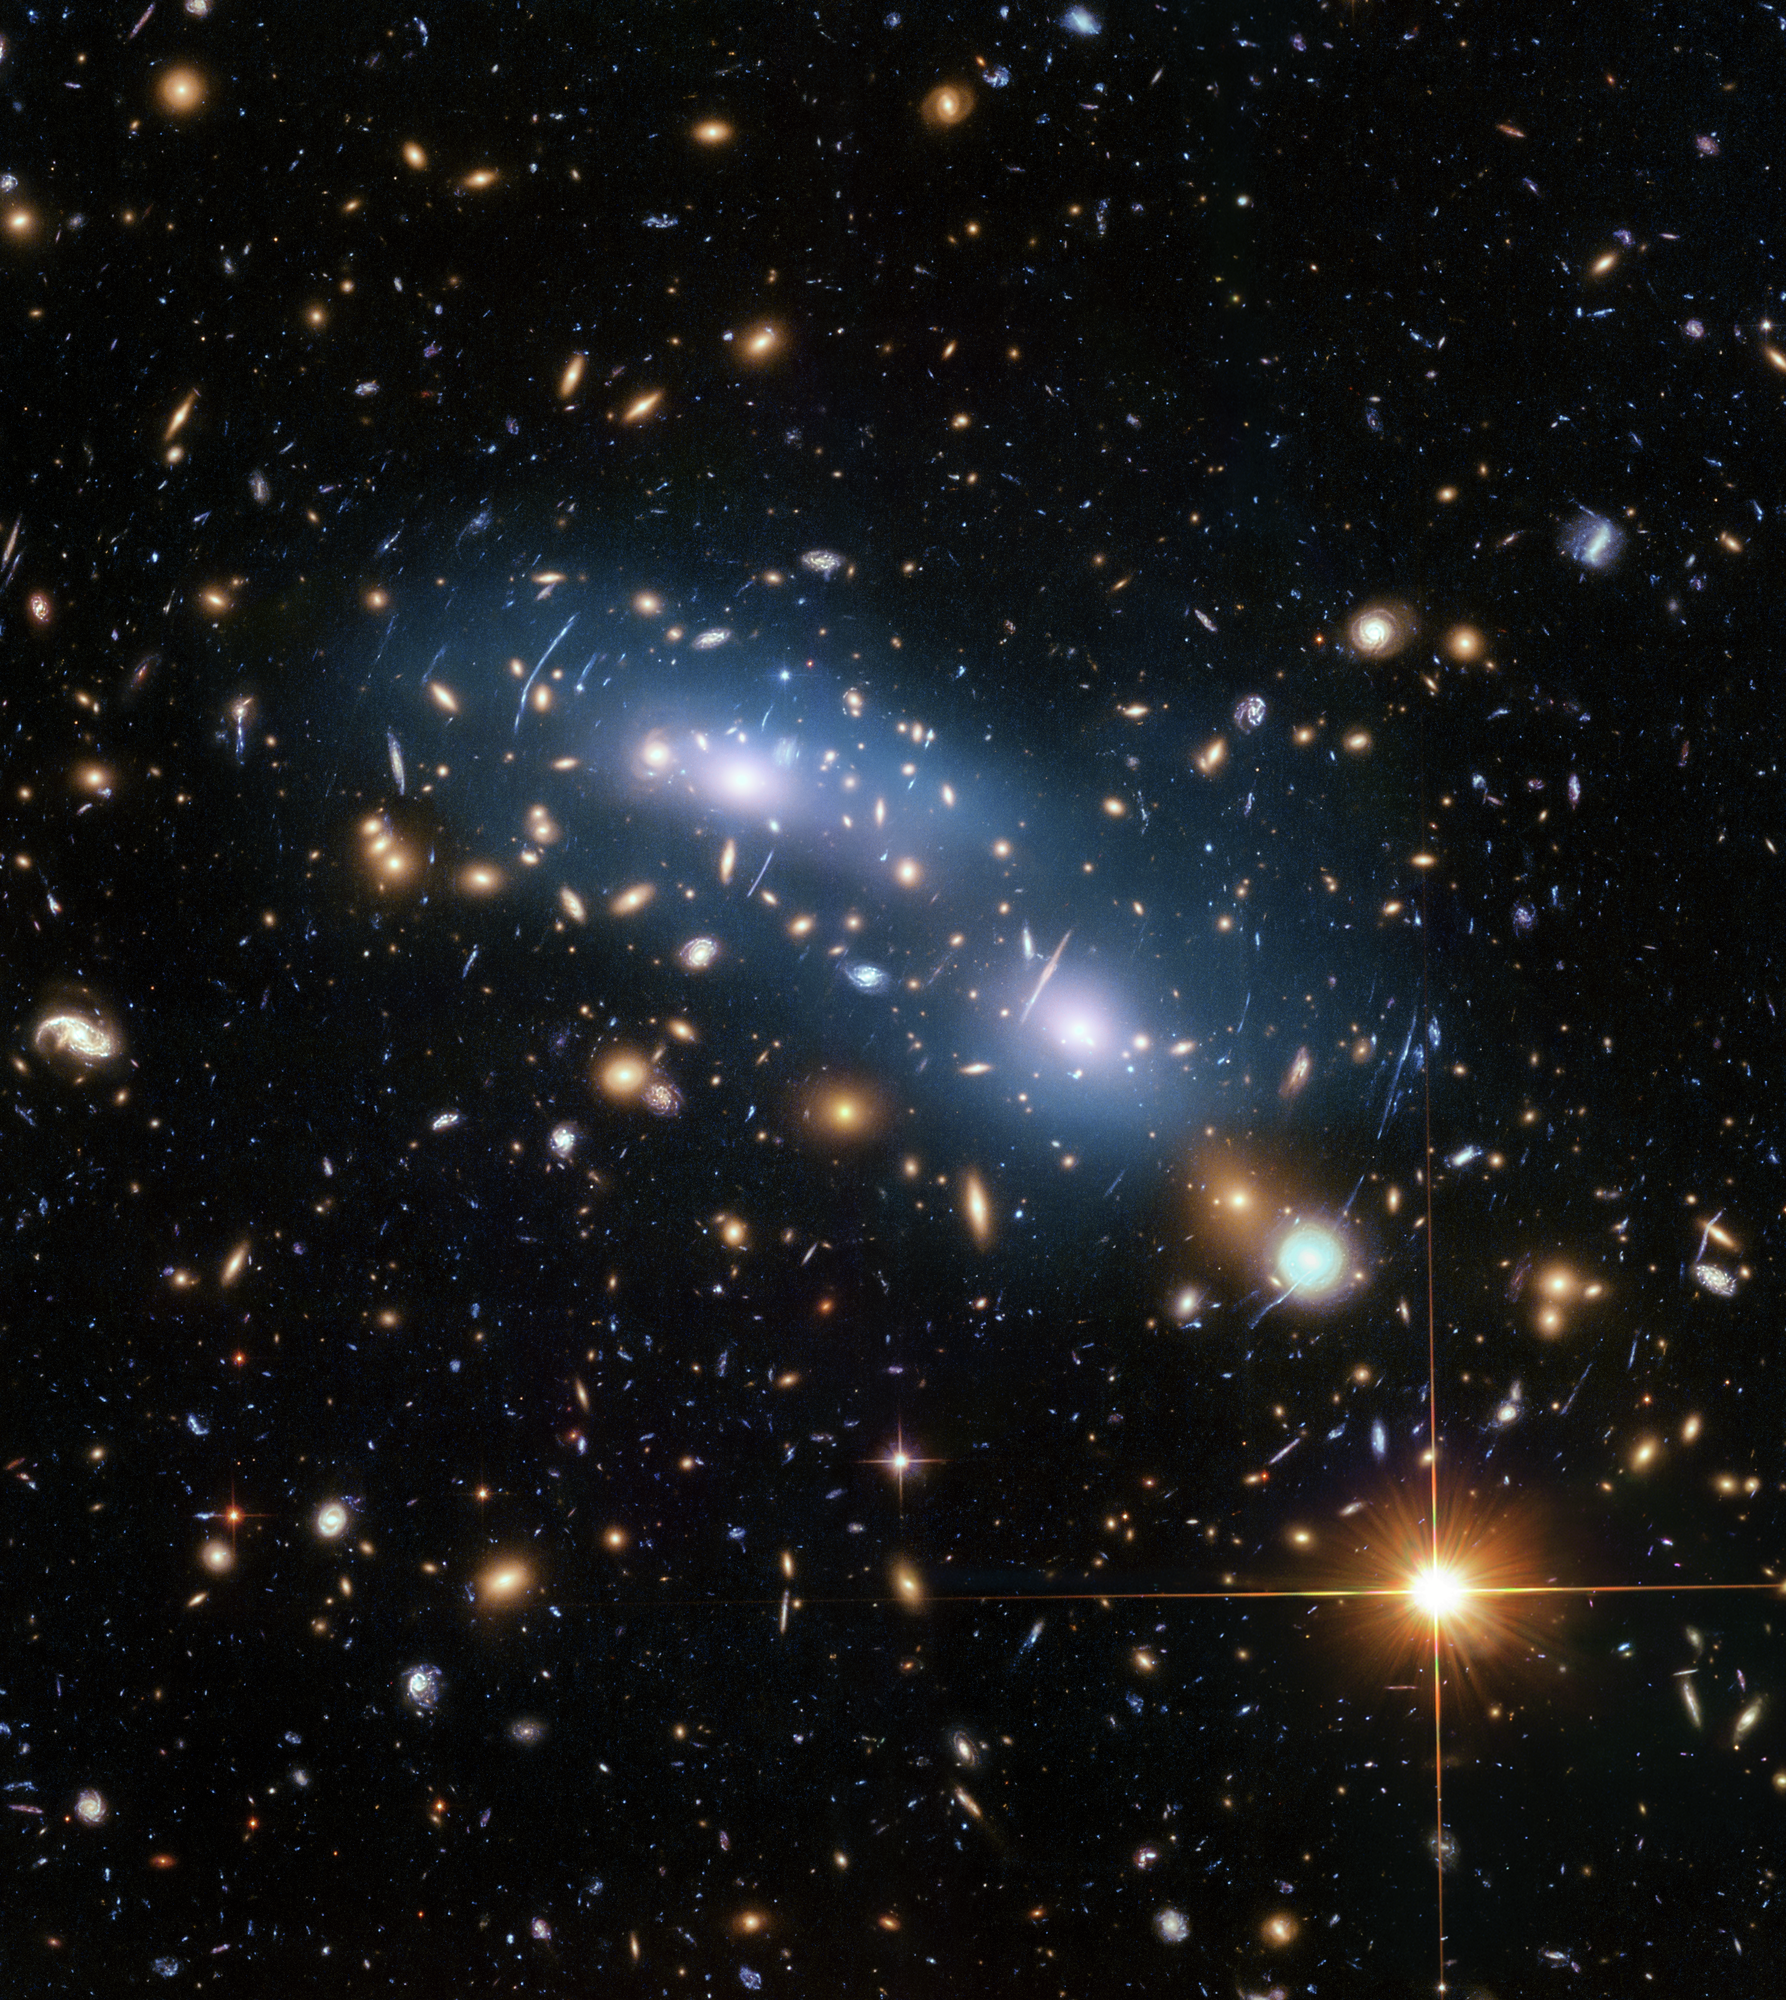 Hubble image of galaxy cluster MACS J0416 showing a starry sky scene with central blue smear